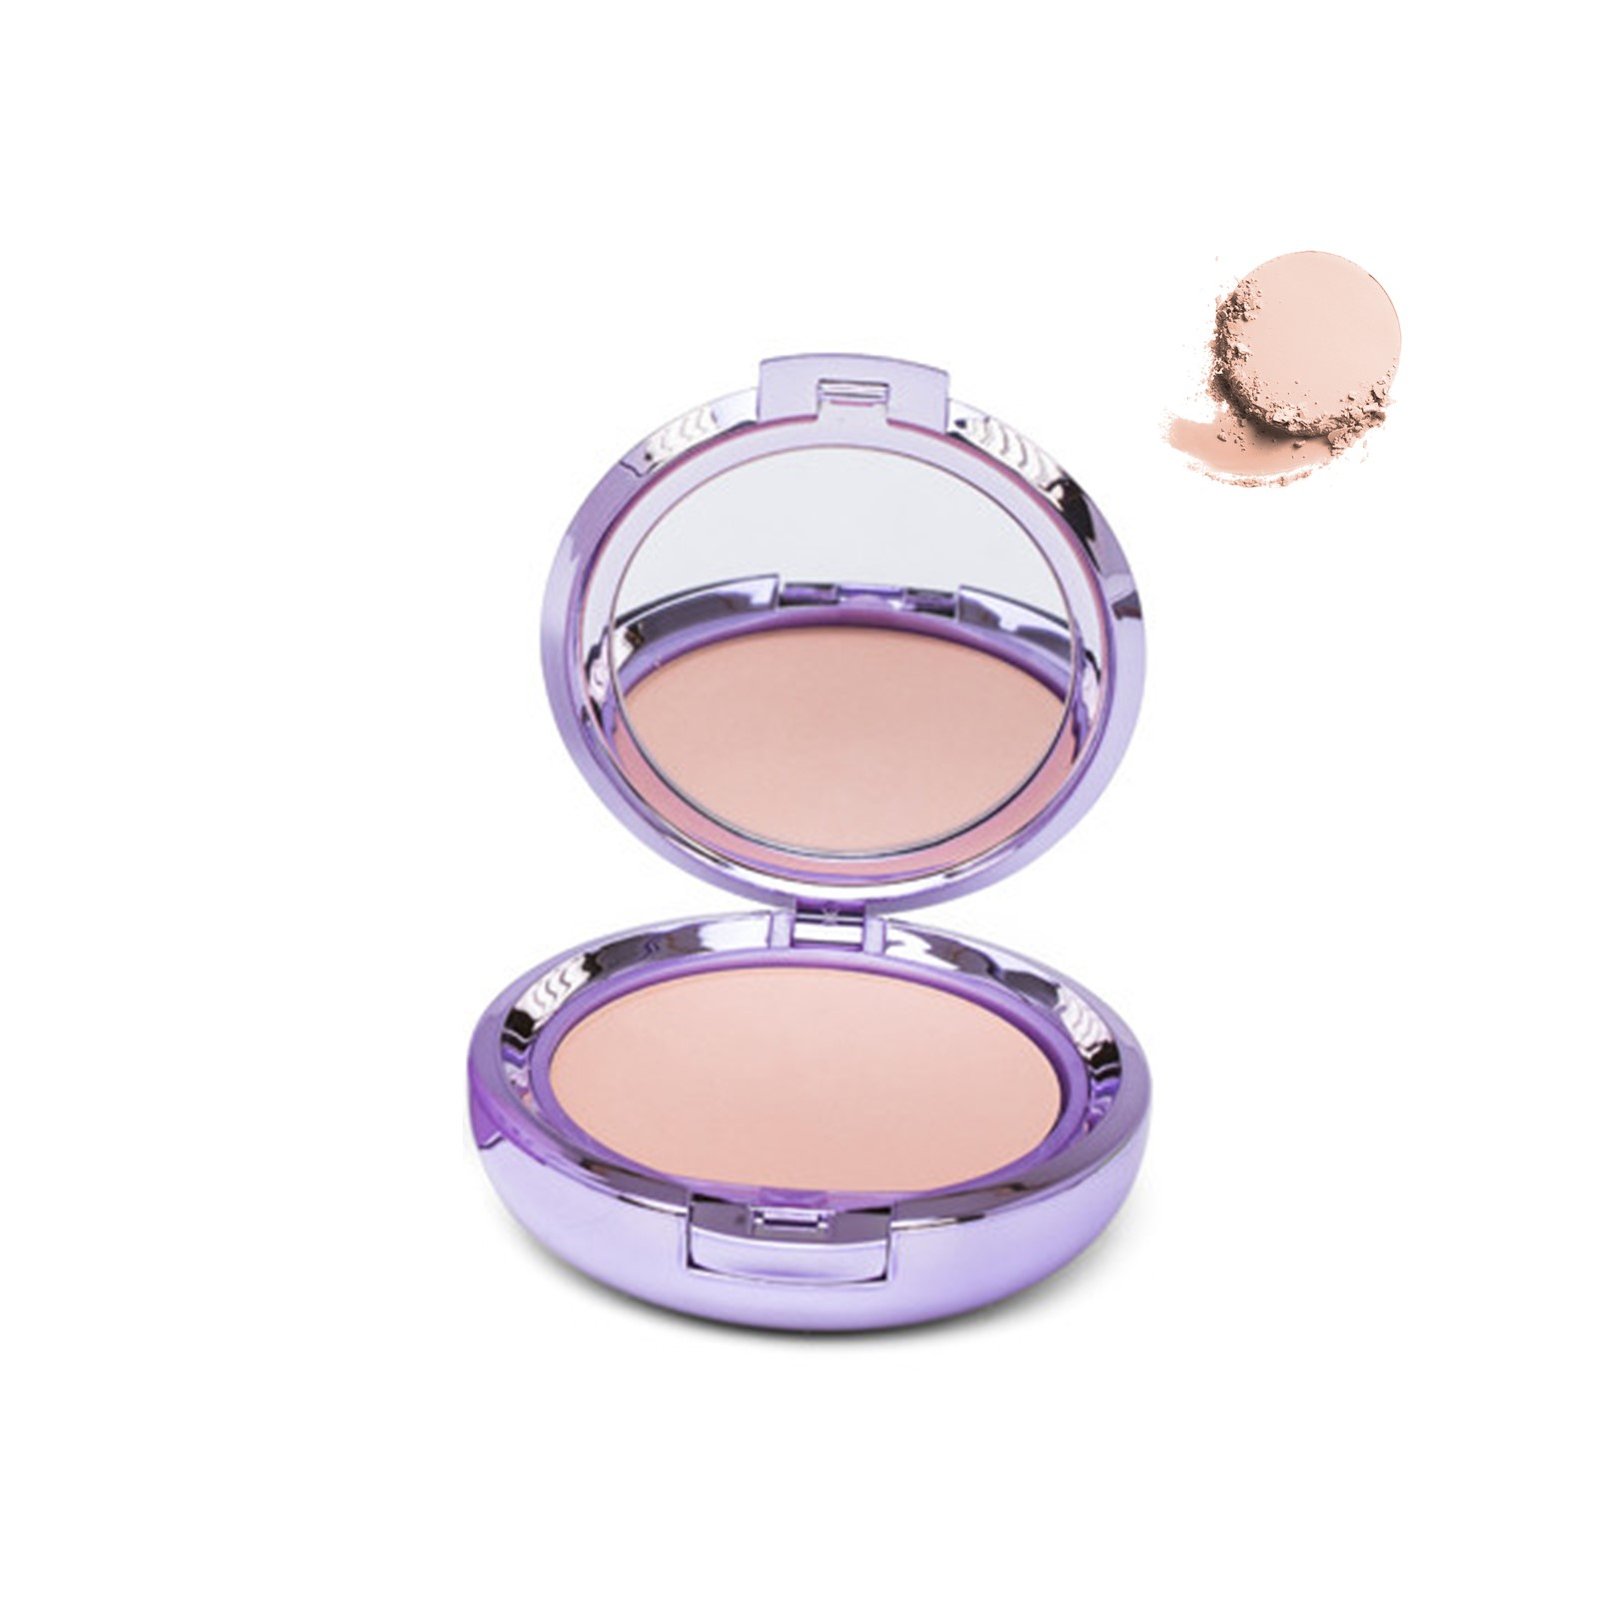 Covermark Compact Powder Normal Skin 2 10g